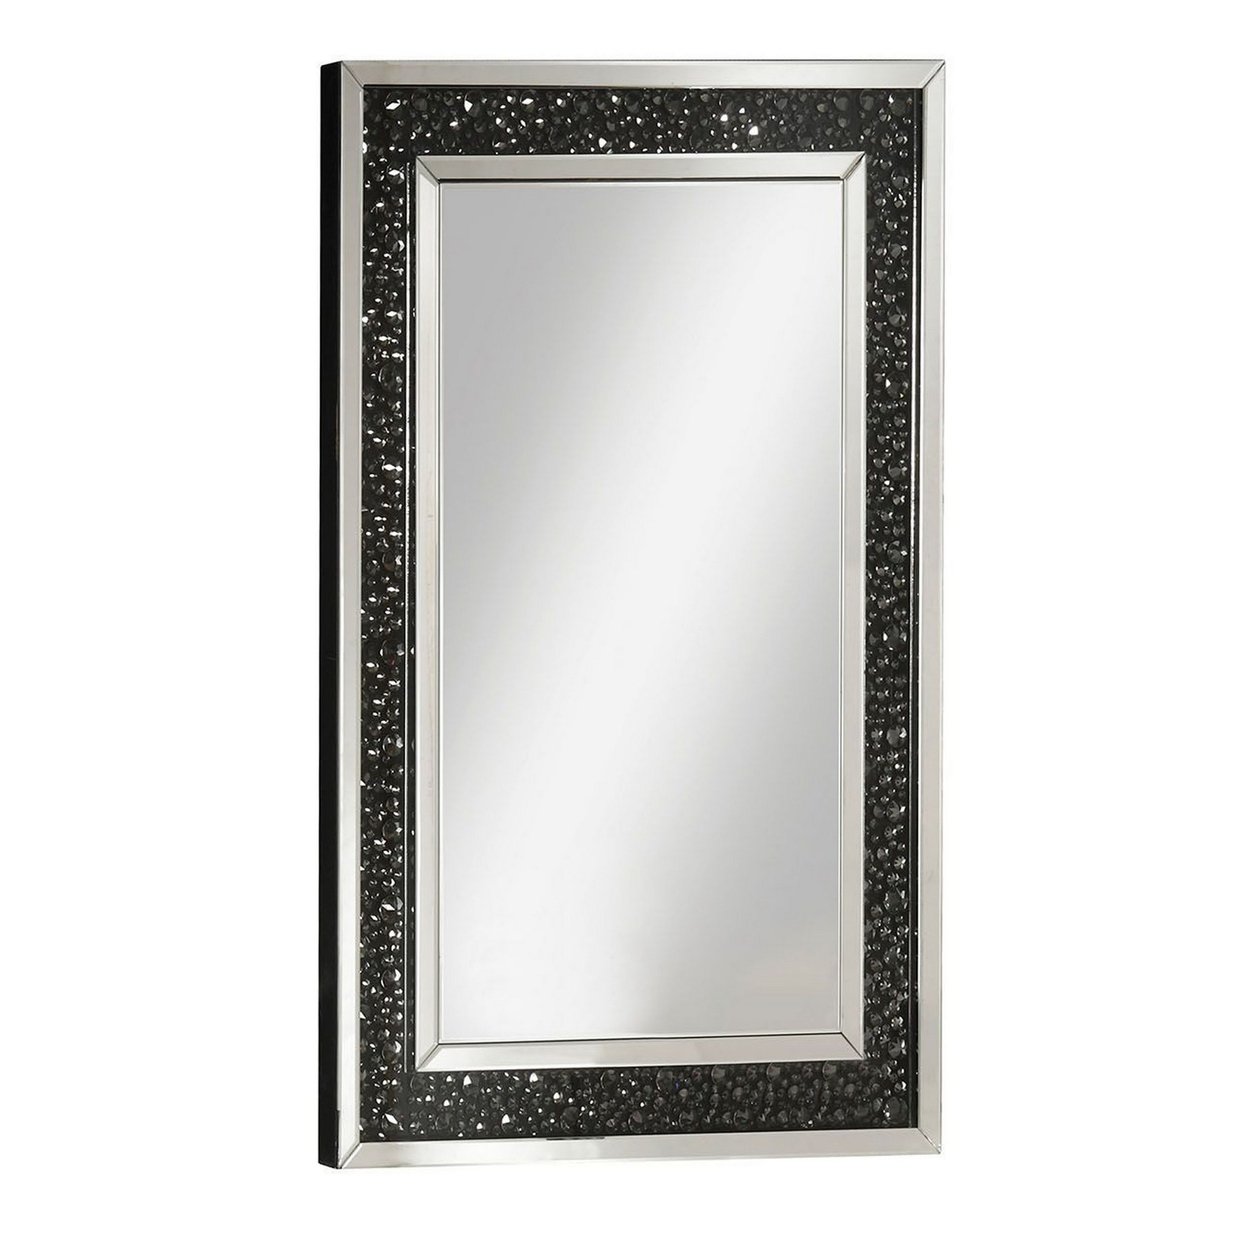 Rectangular Wall Accent Mirror With Black Crystal Insert In Mirrored Frame- Saltoro Sherpi